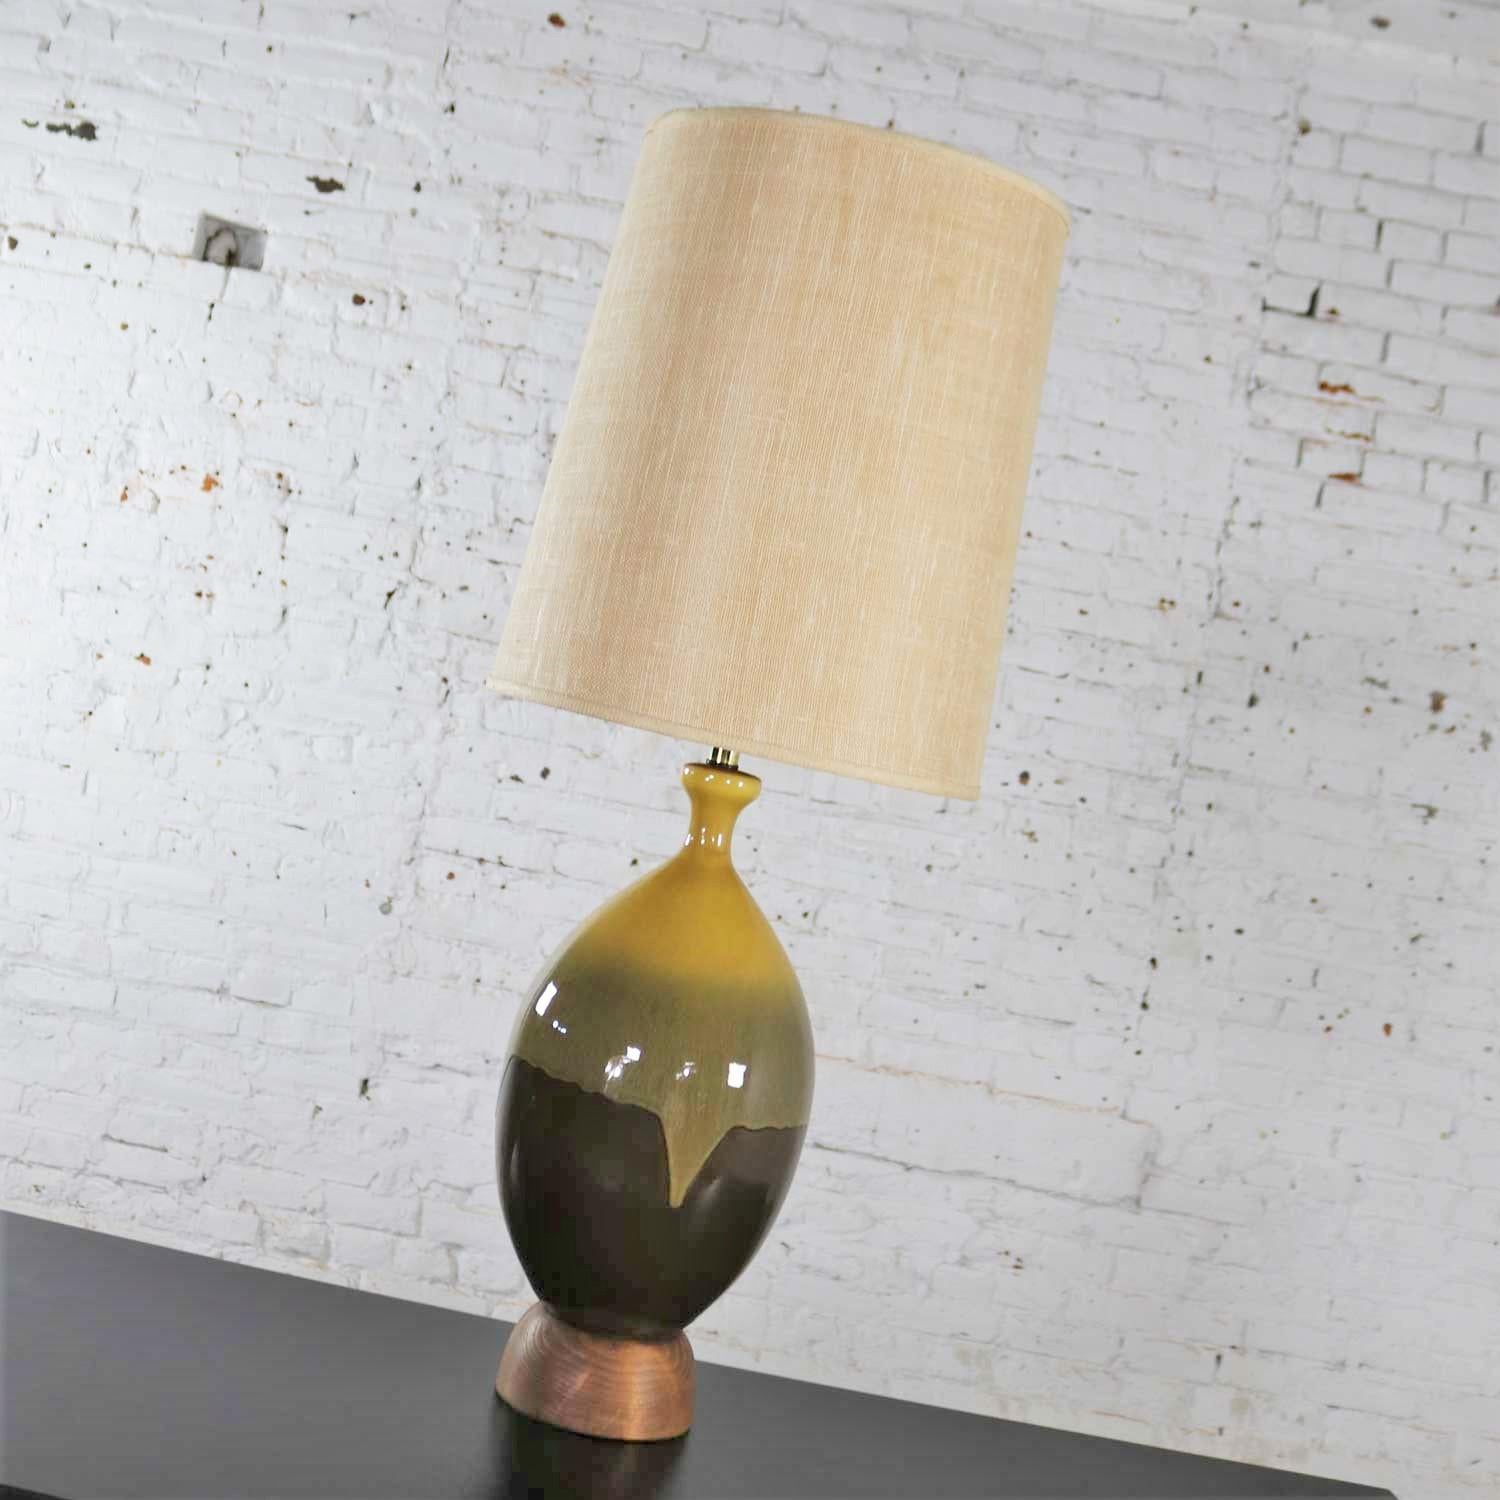 Handsome large Mid-Century Modern ceramic table lamp with a brown and golden yellow drip glaze on a wood base. It wears its original hard lined linen look tall drum shade. Both are in wonderful condition. It has been rewired and given a new socket.